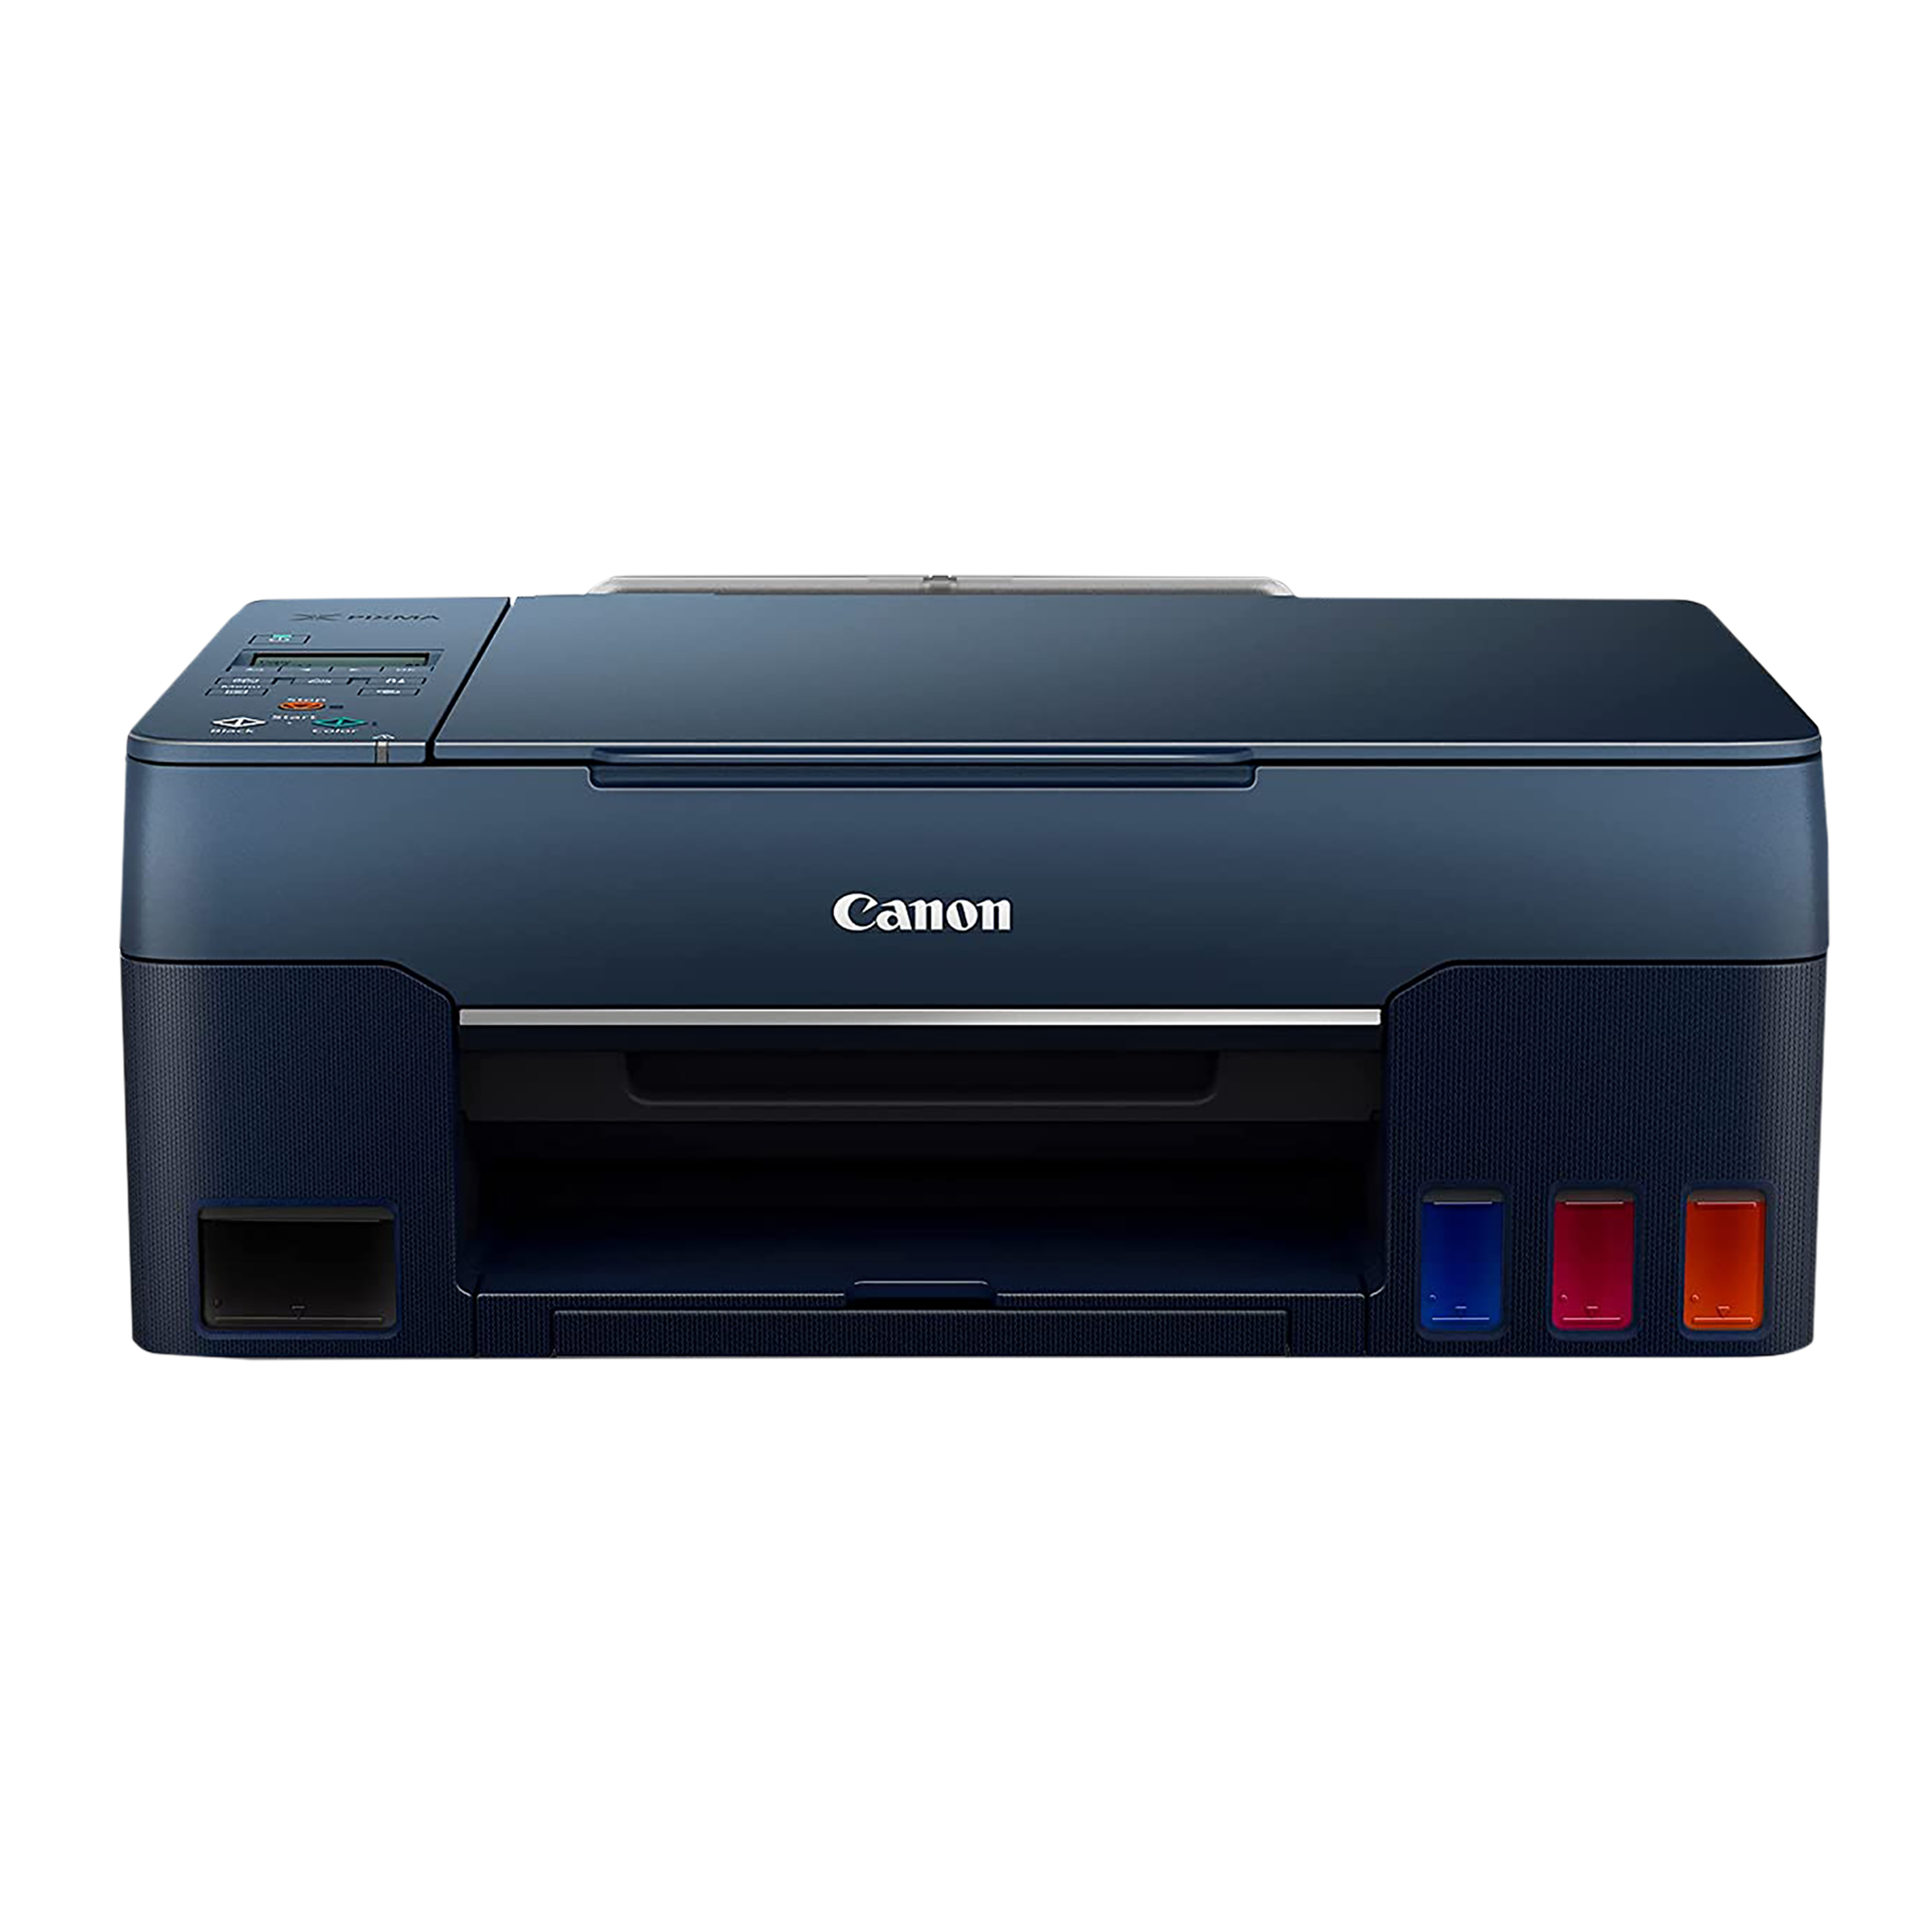 Canon G3060 Multi-function Color Printer with Voice Activated Printing Google Assistant and Alexa